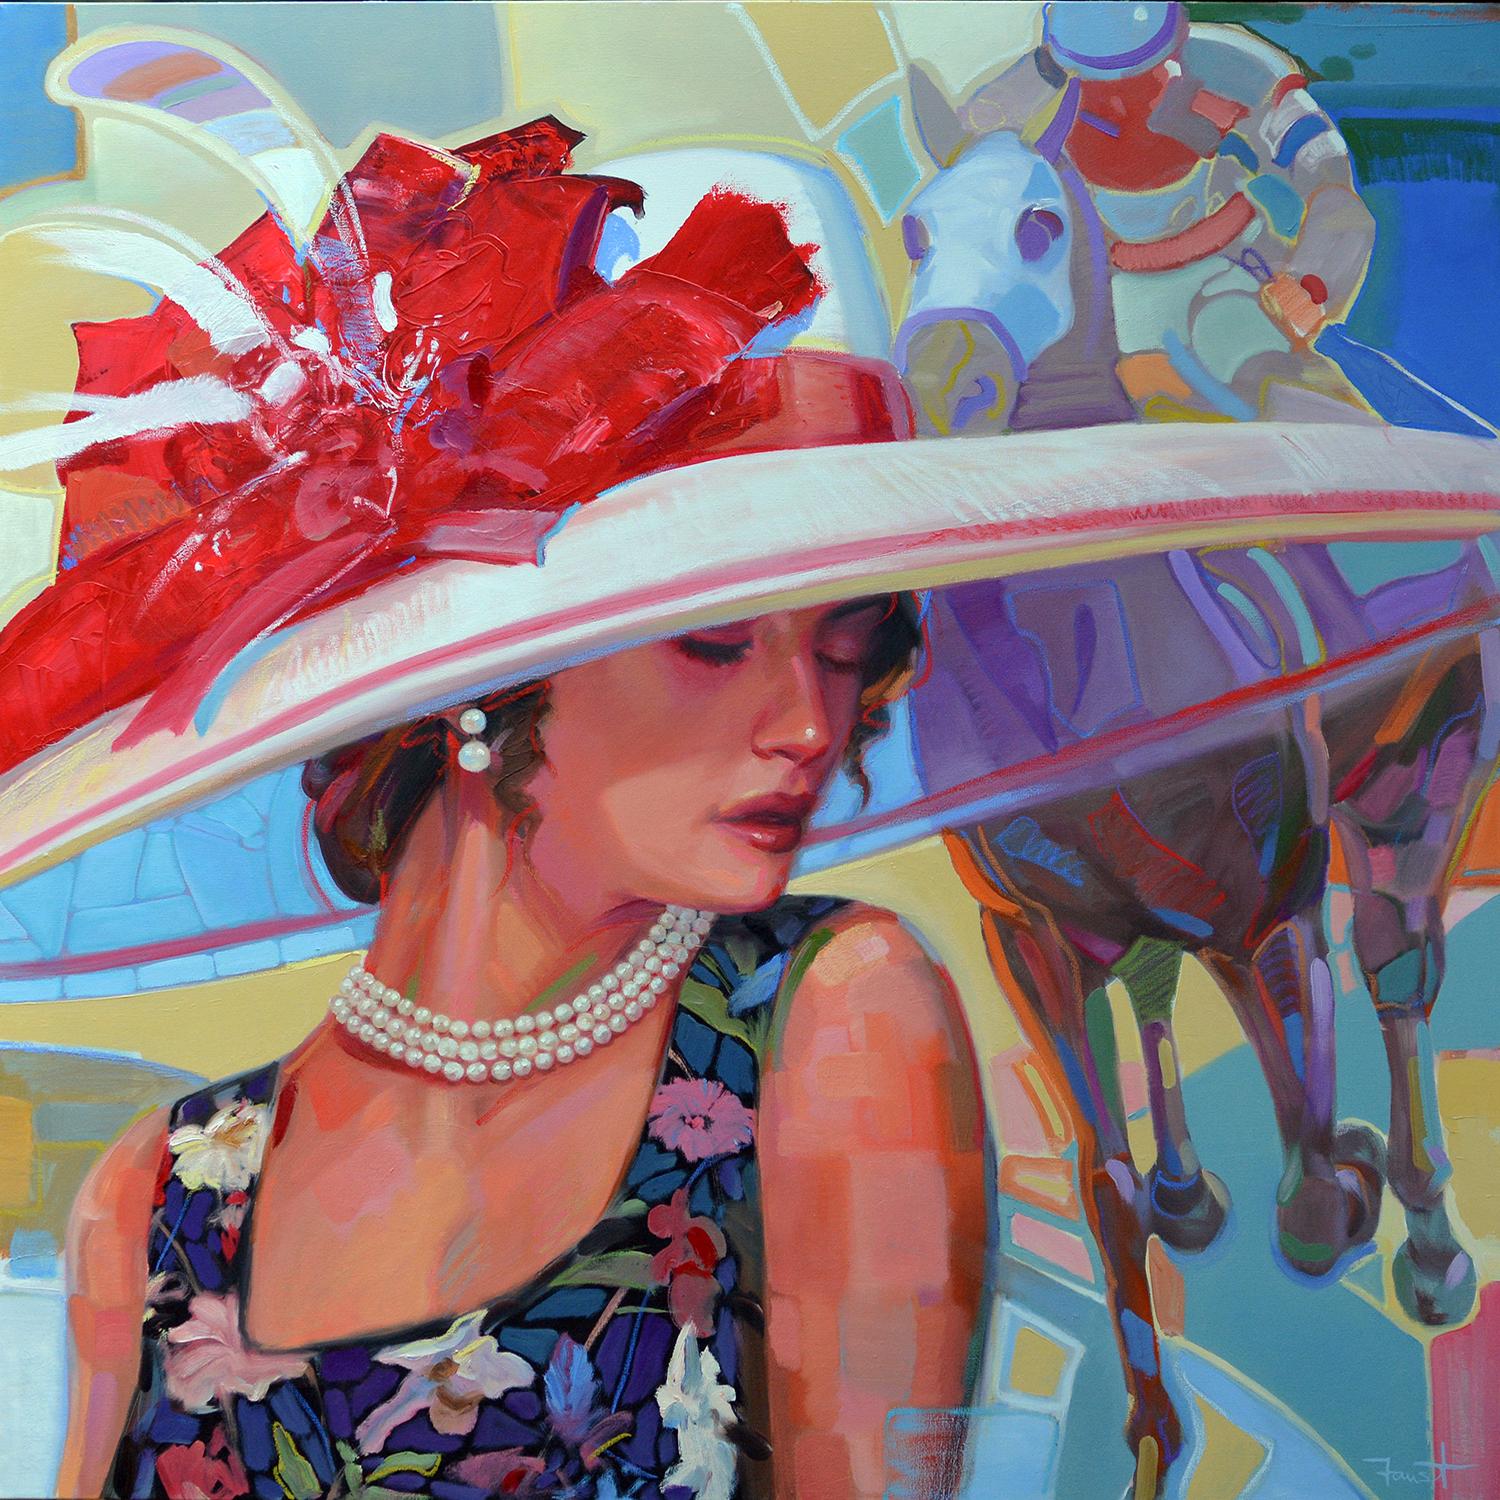 Shawn Faust, "Pearl Hat", Horse and Woman Mixed Media Painting